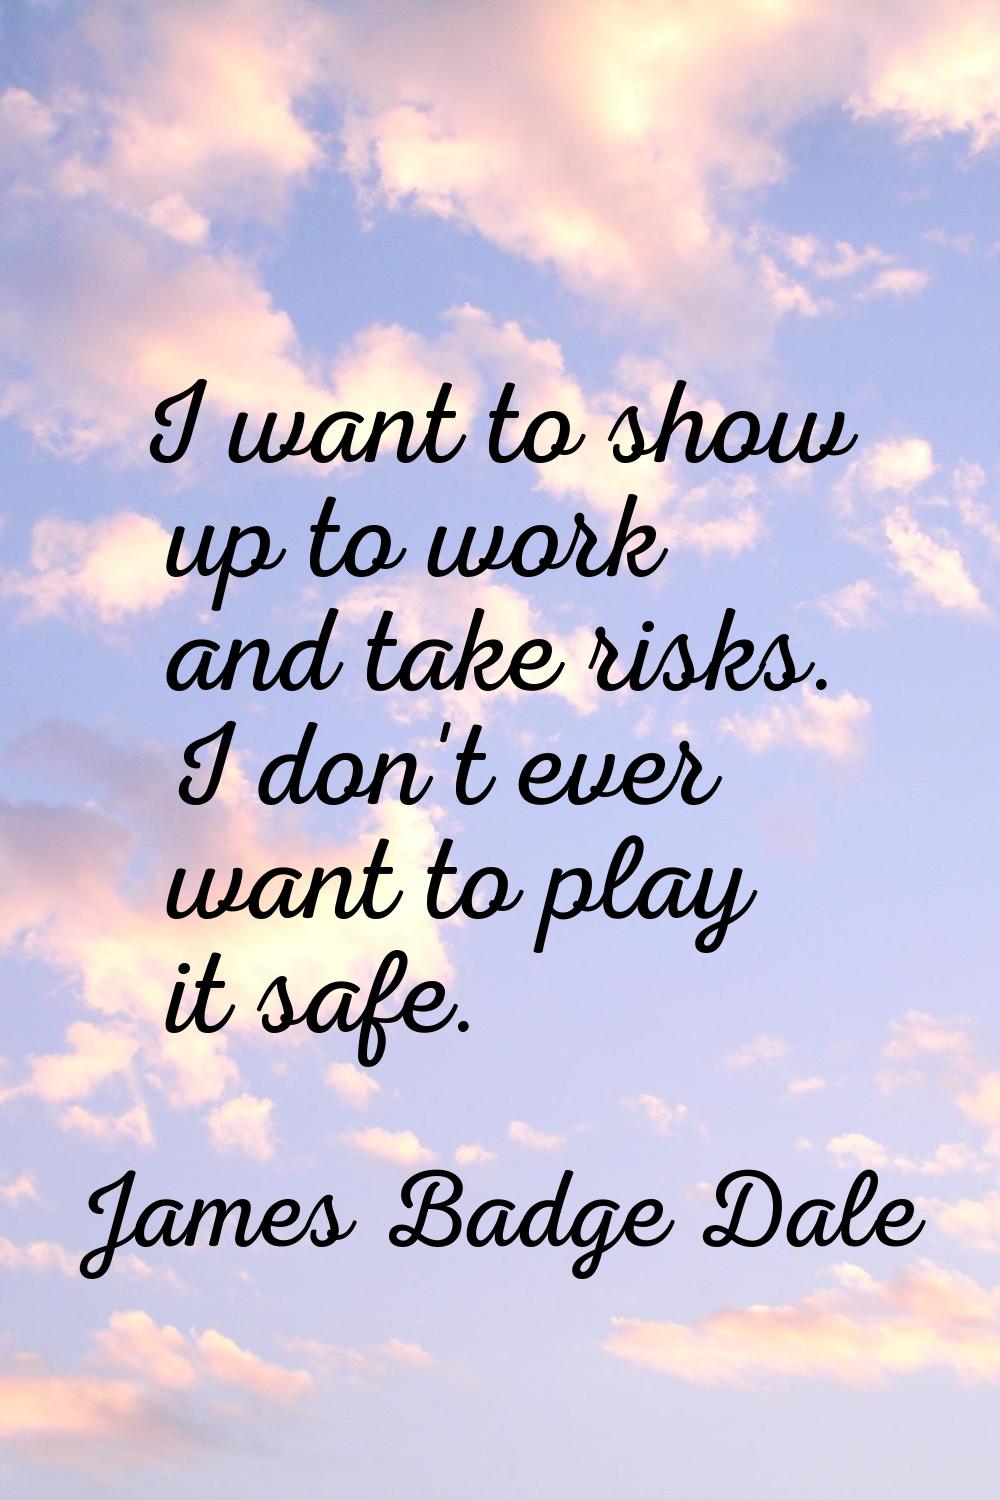 I want to show up to work and take risks. I don't ever want to play it safe.